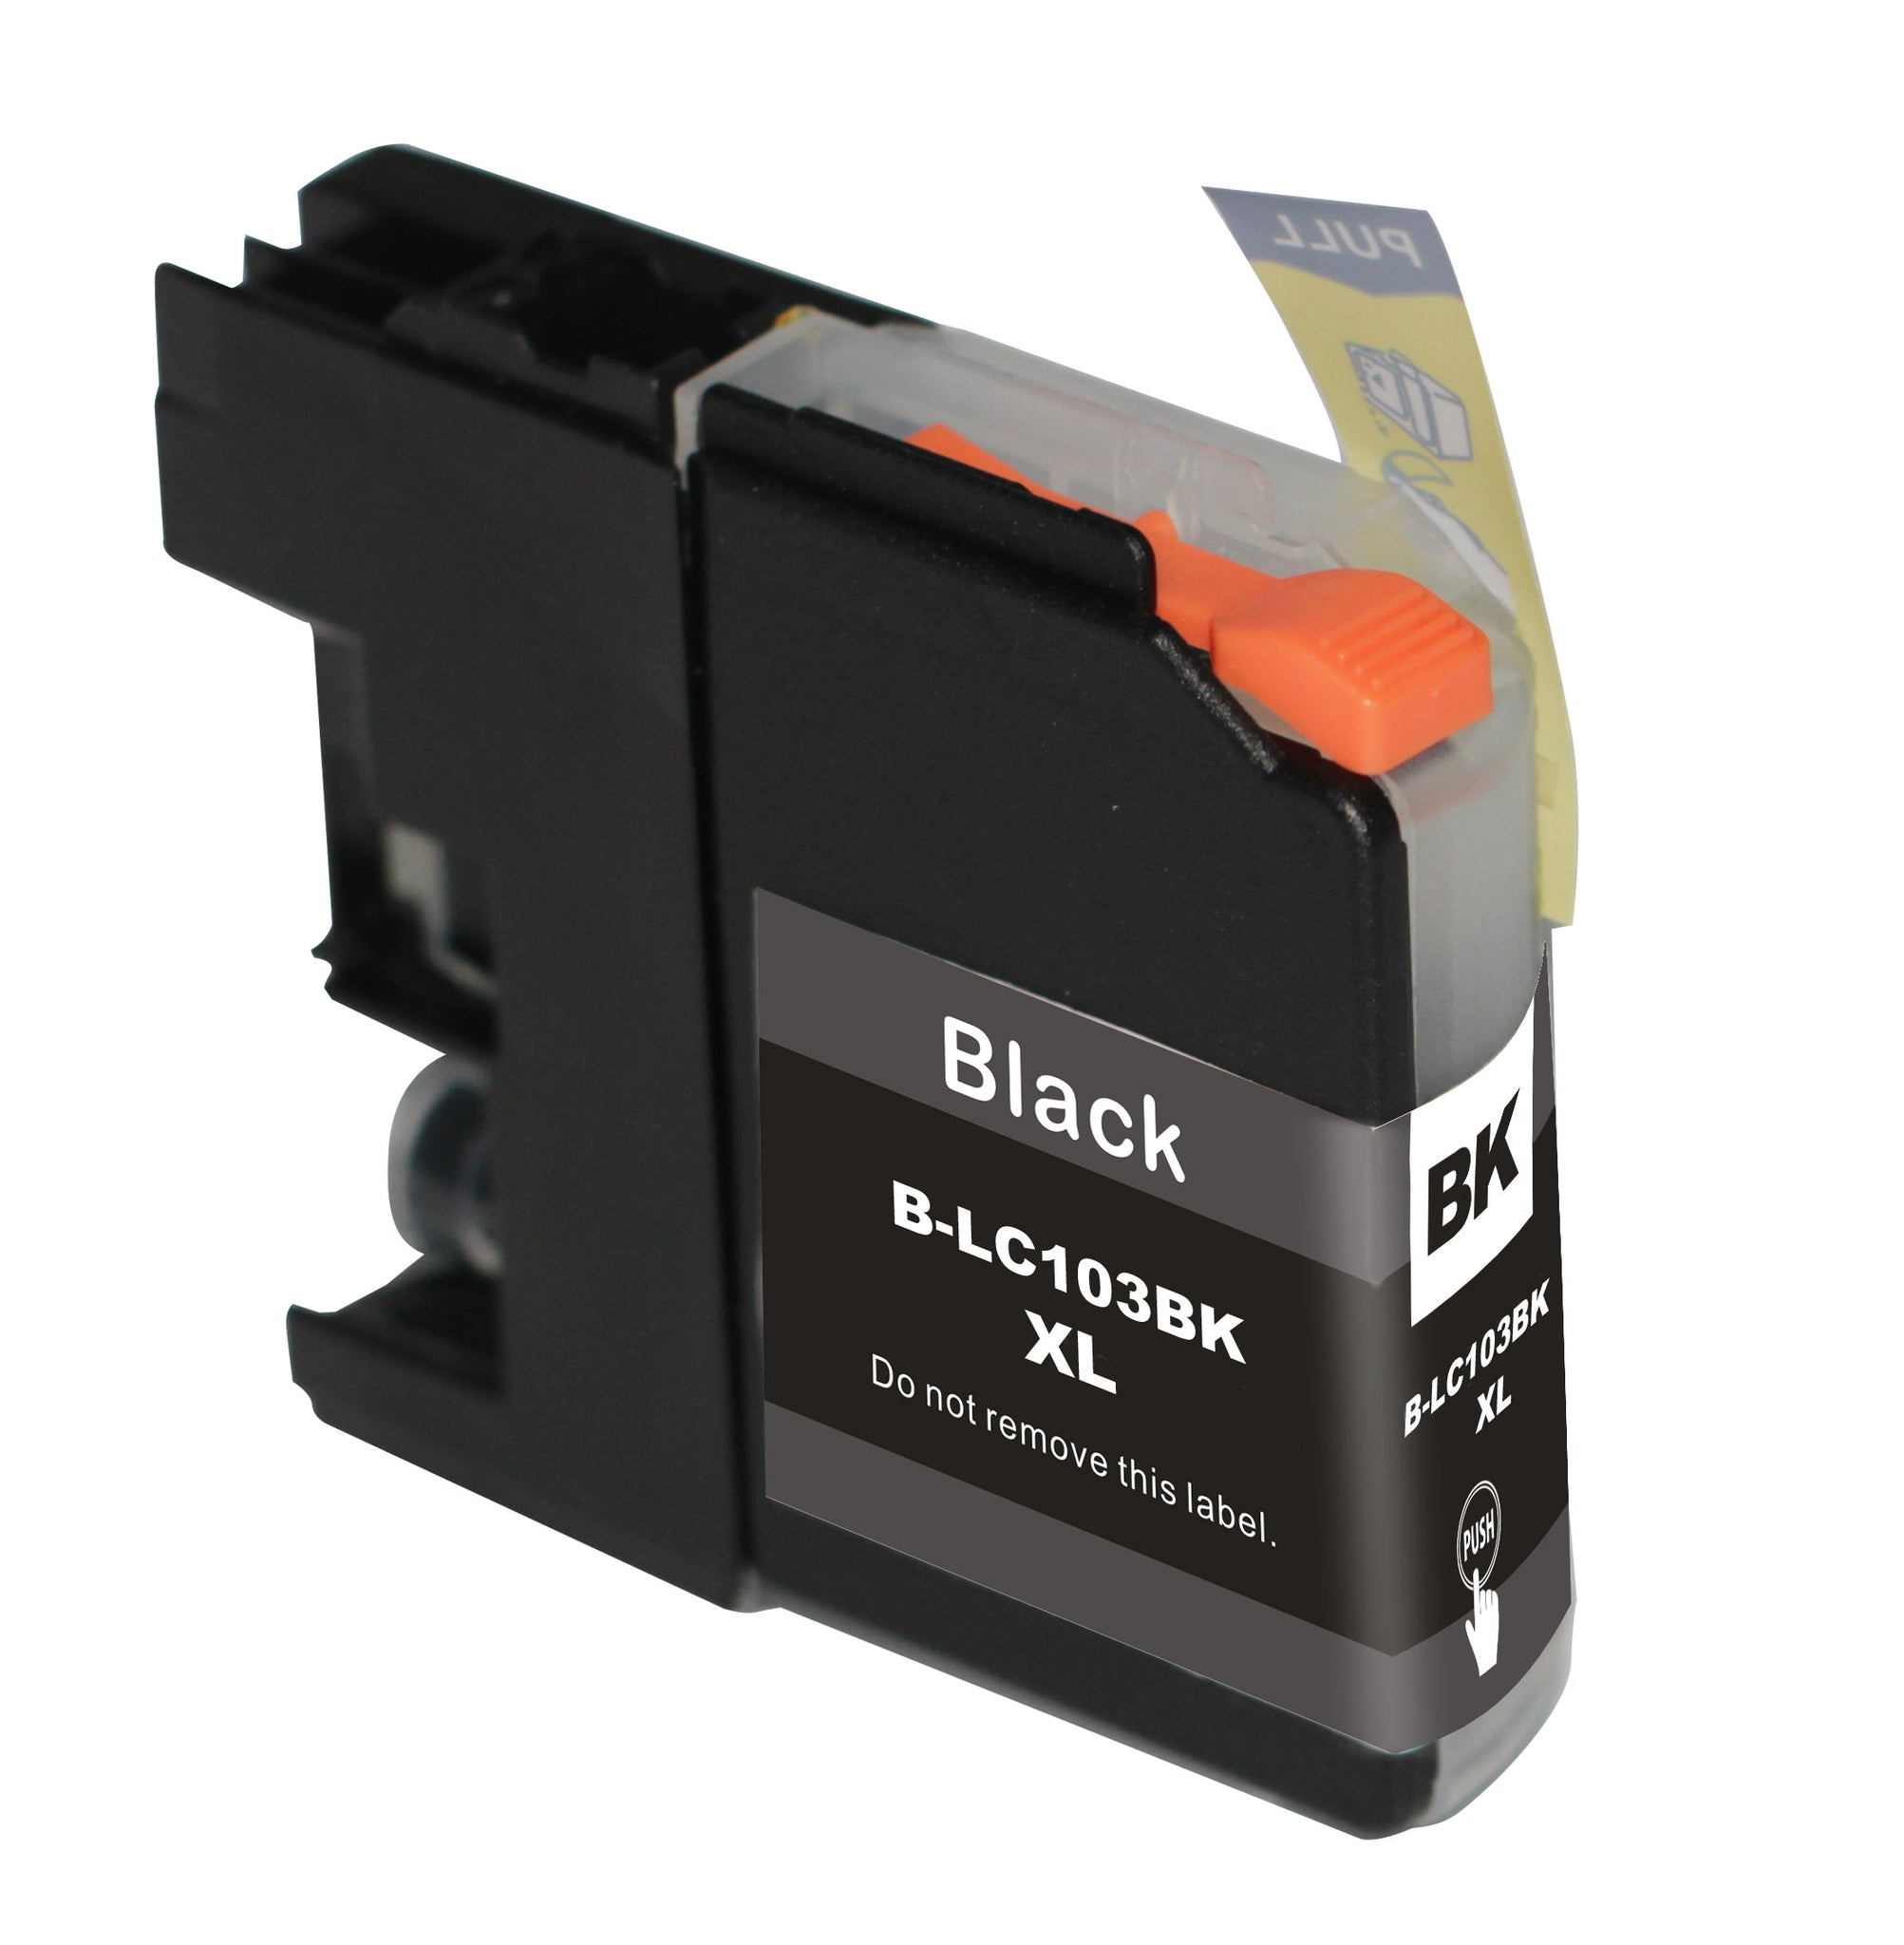 Brother LC 103XL New Black Compatible Inkjet Cartridge (LC 103)